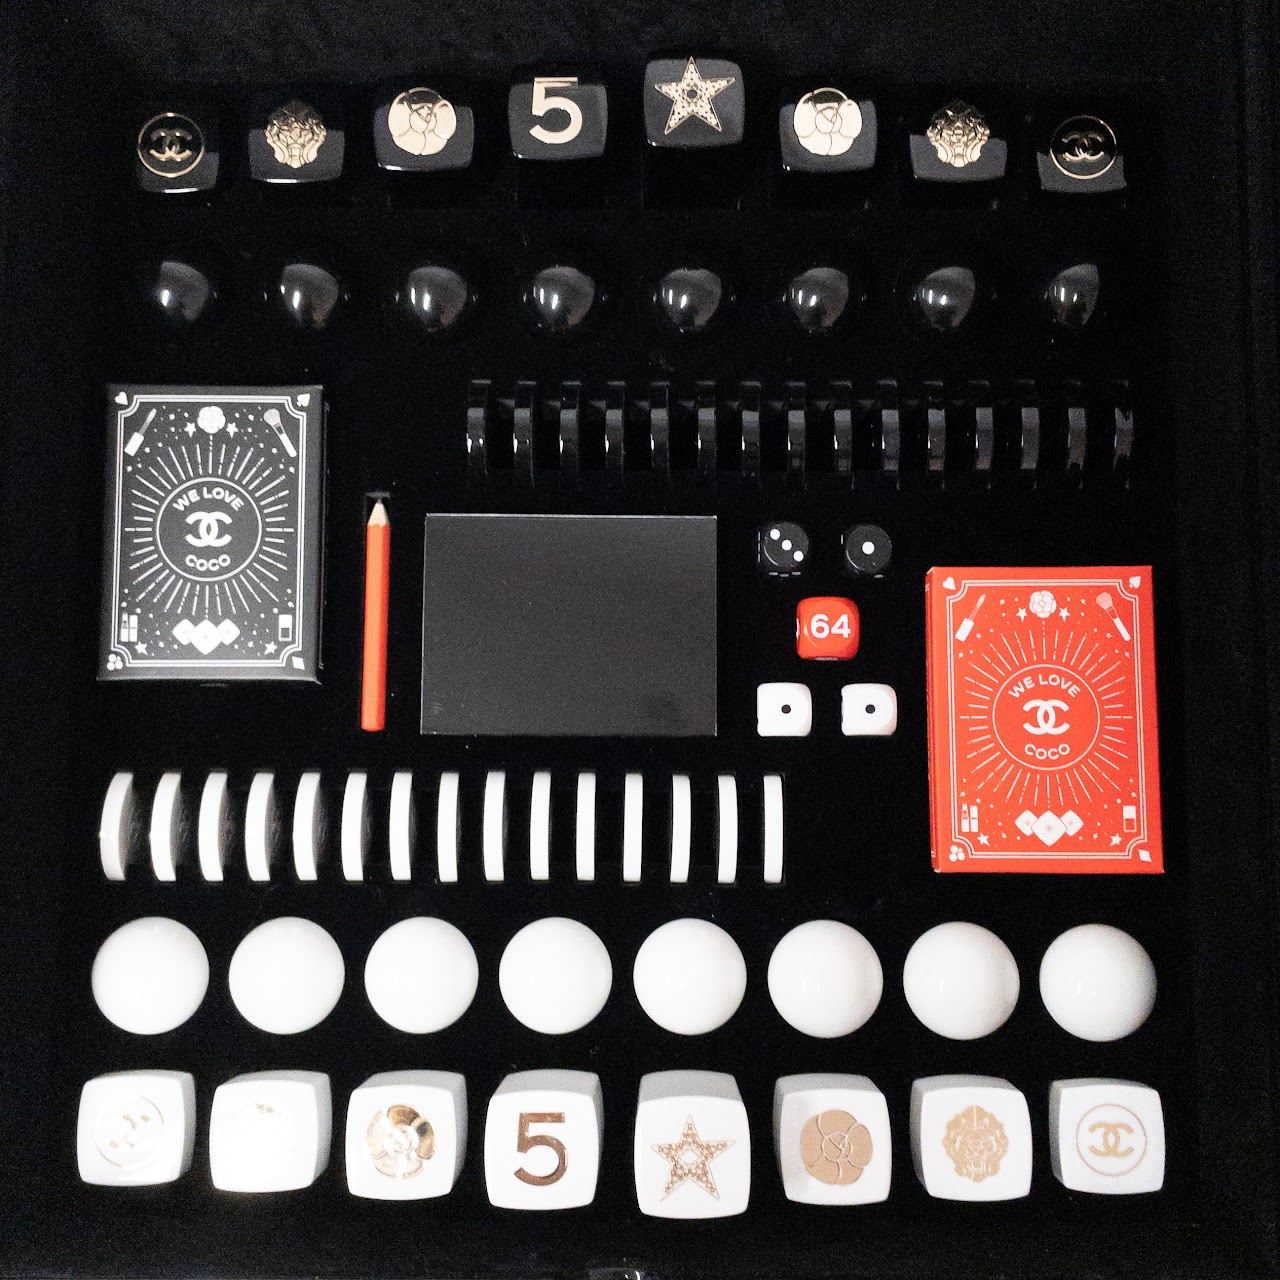 CHANEL Promotional Game Set - Chess, Checkers, Backgammon for Sale